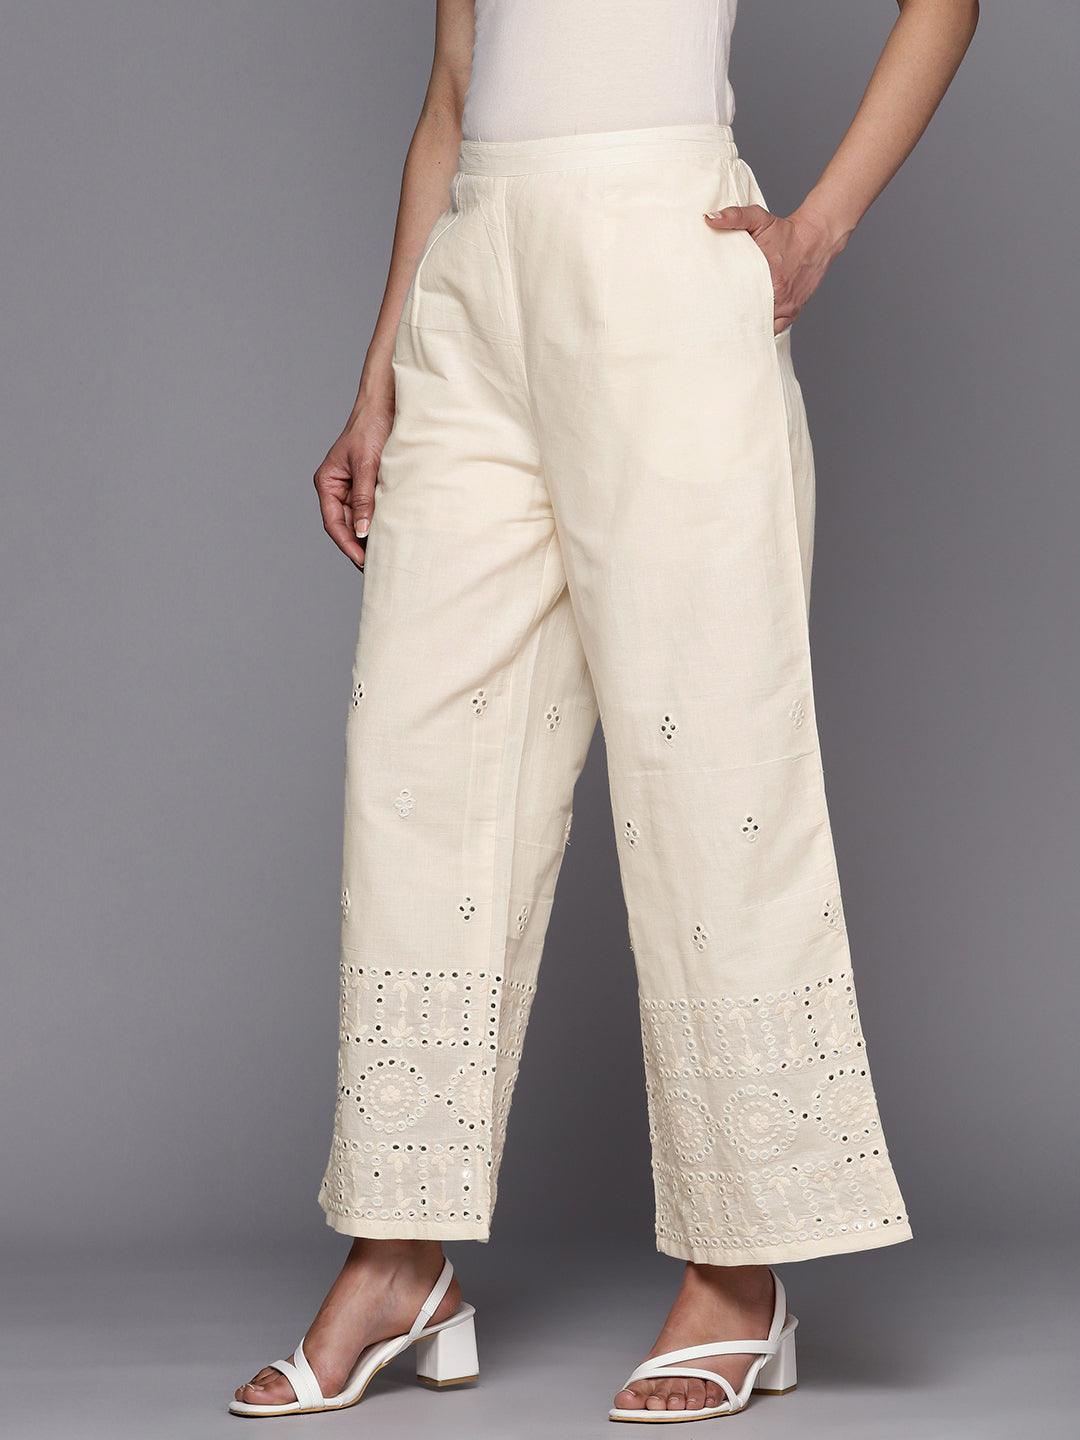 Off White Embroidered Cotton Palazzos